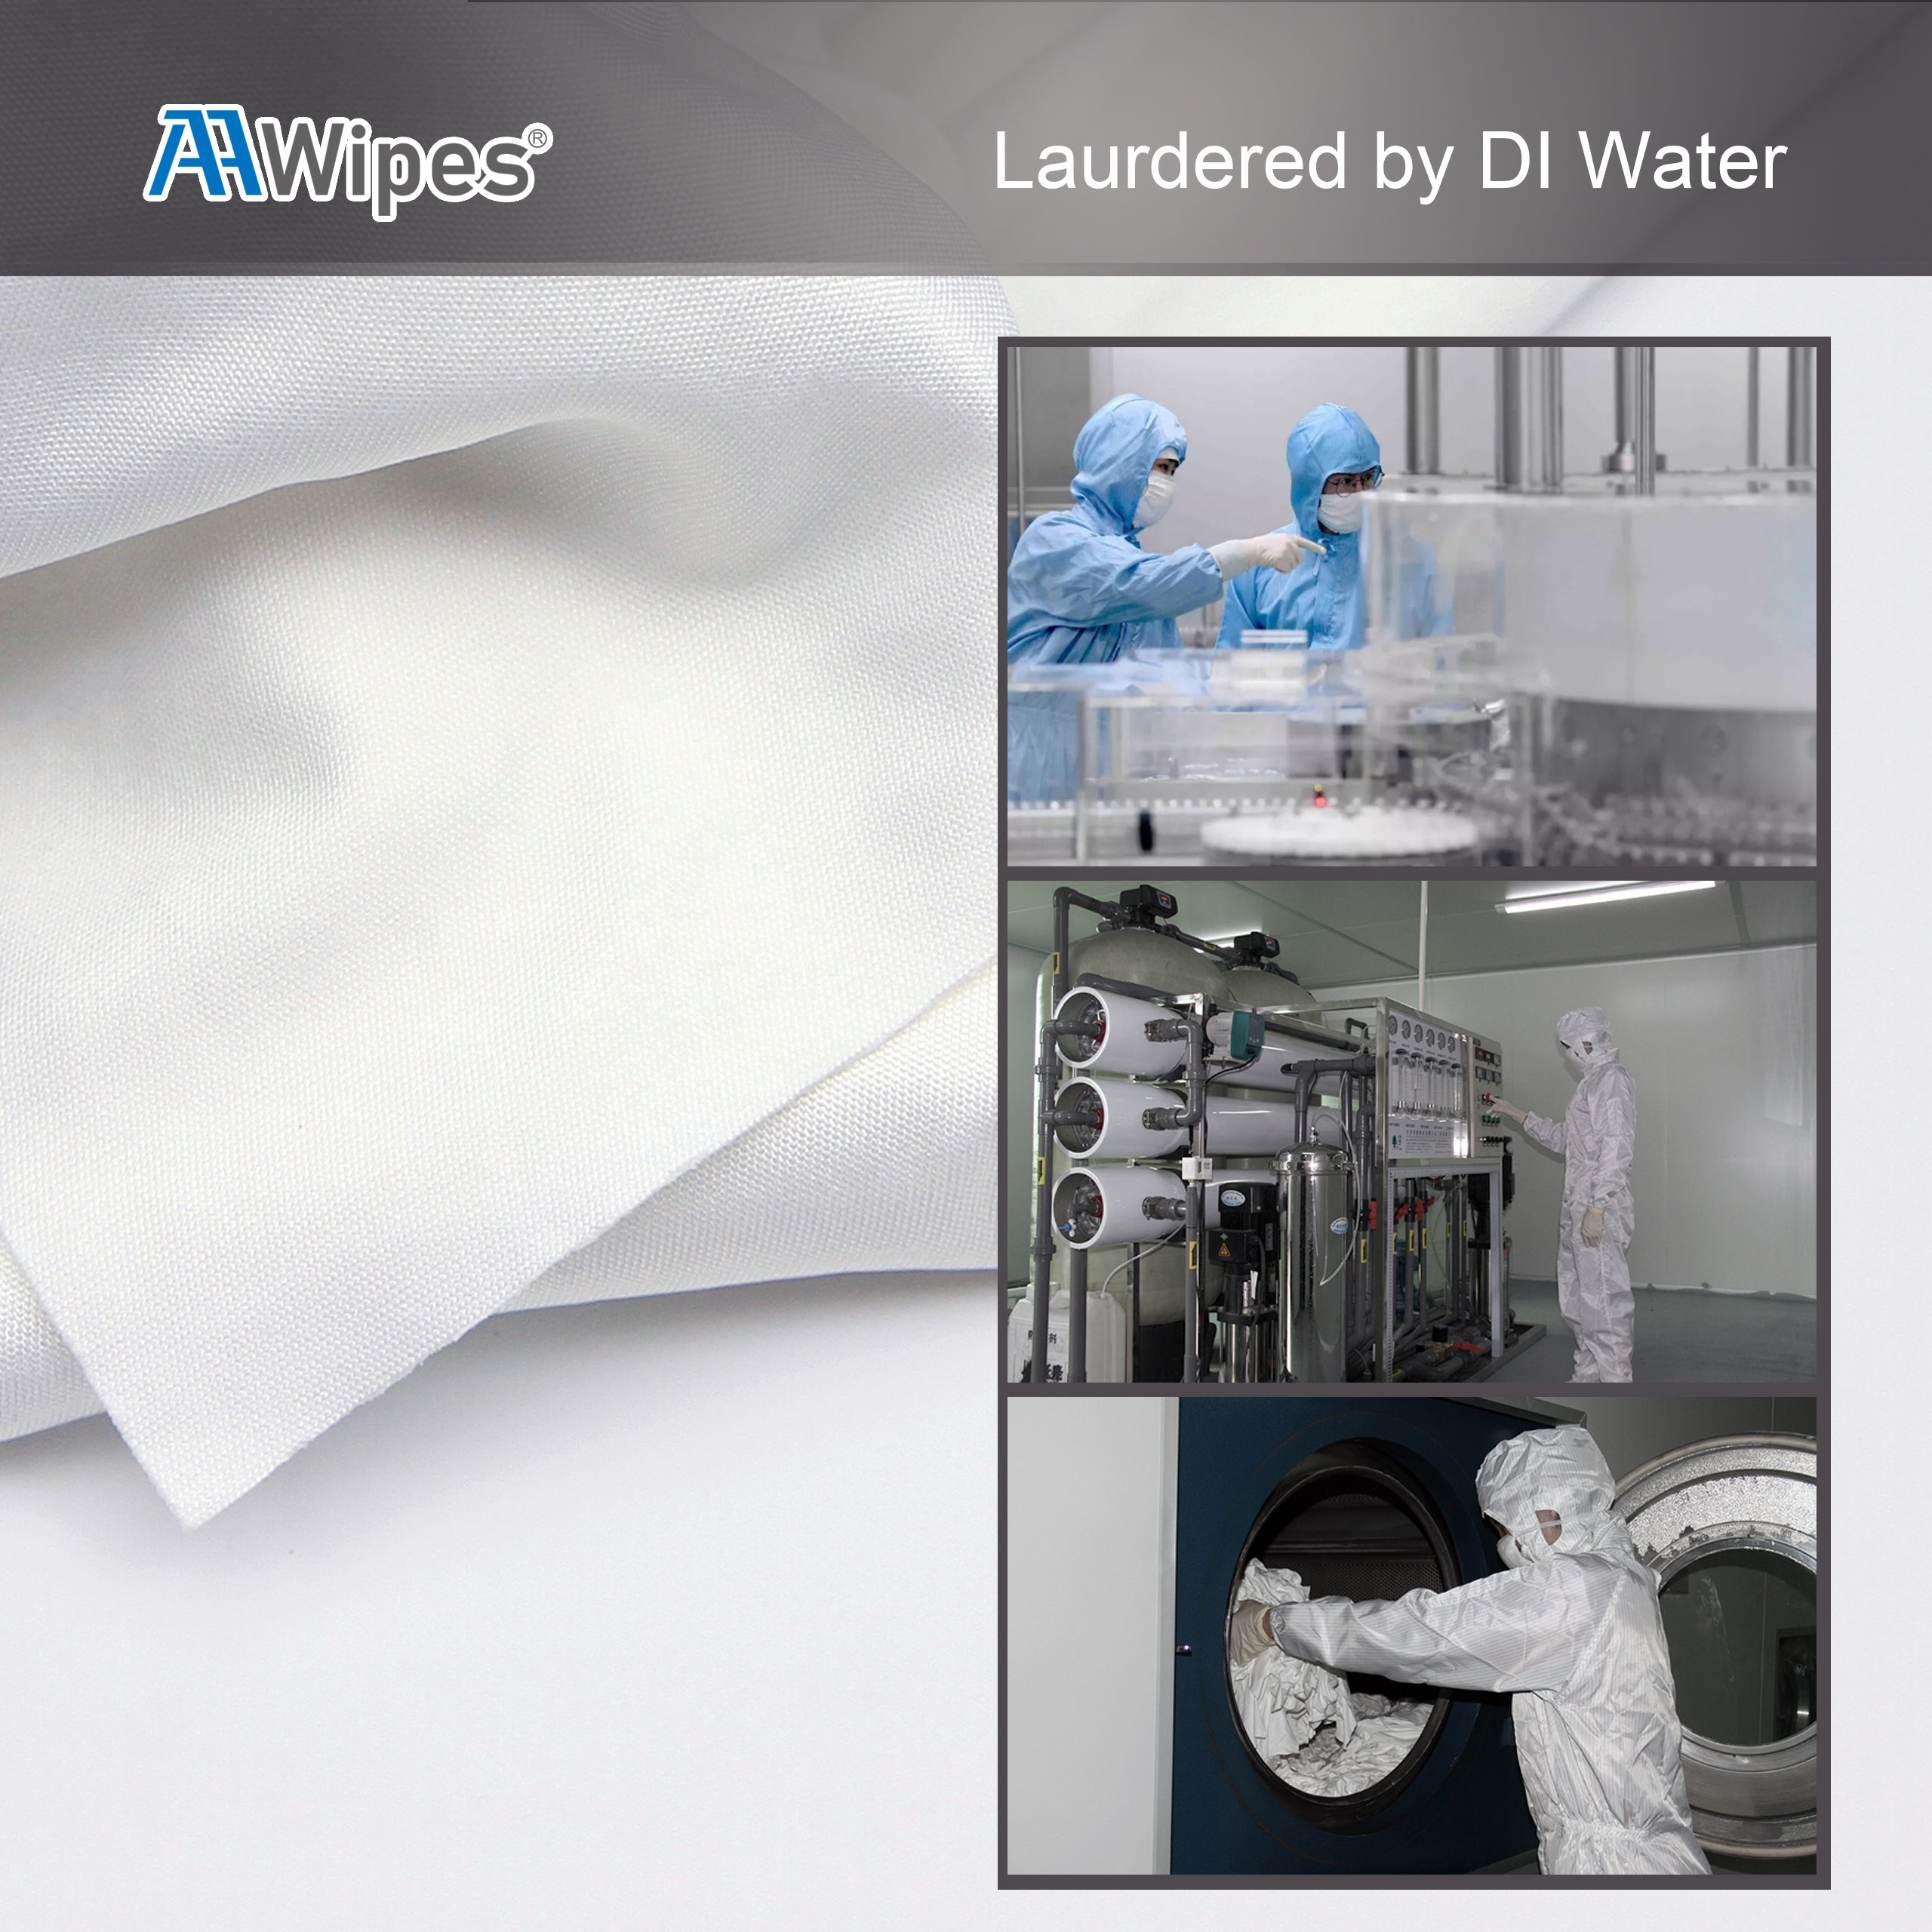 Aawipes cleanroom wipes laurdered by DI water